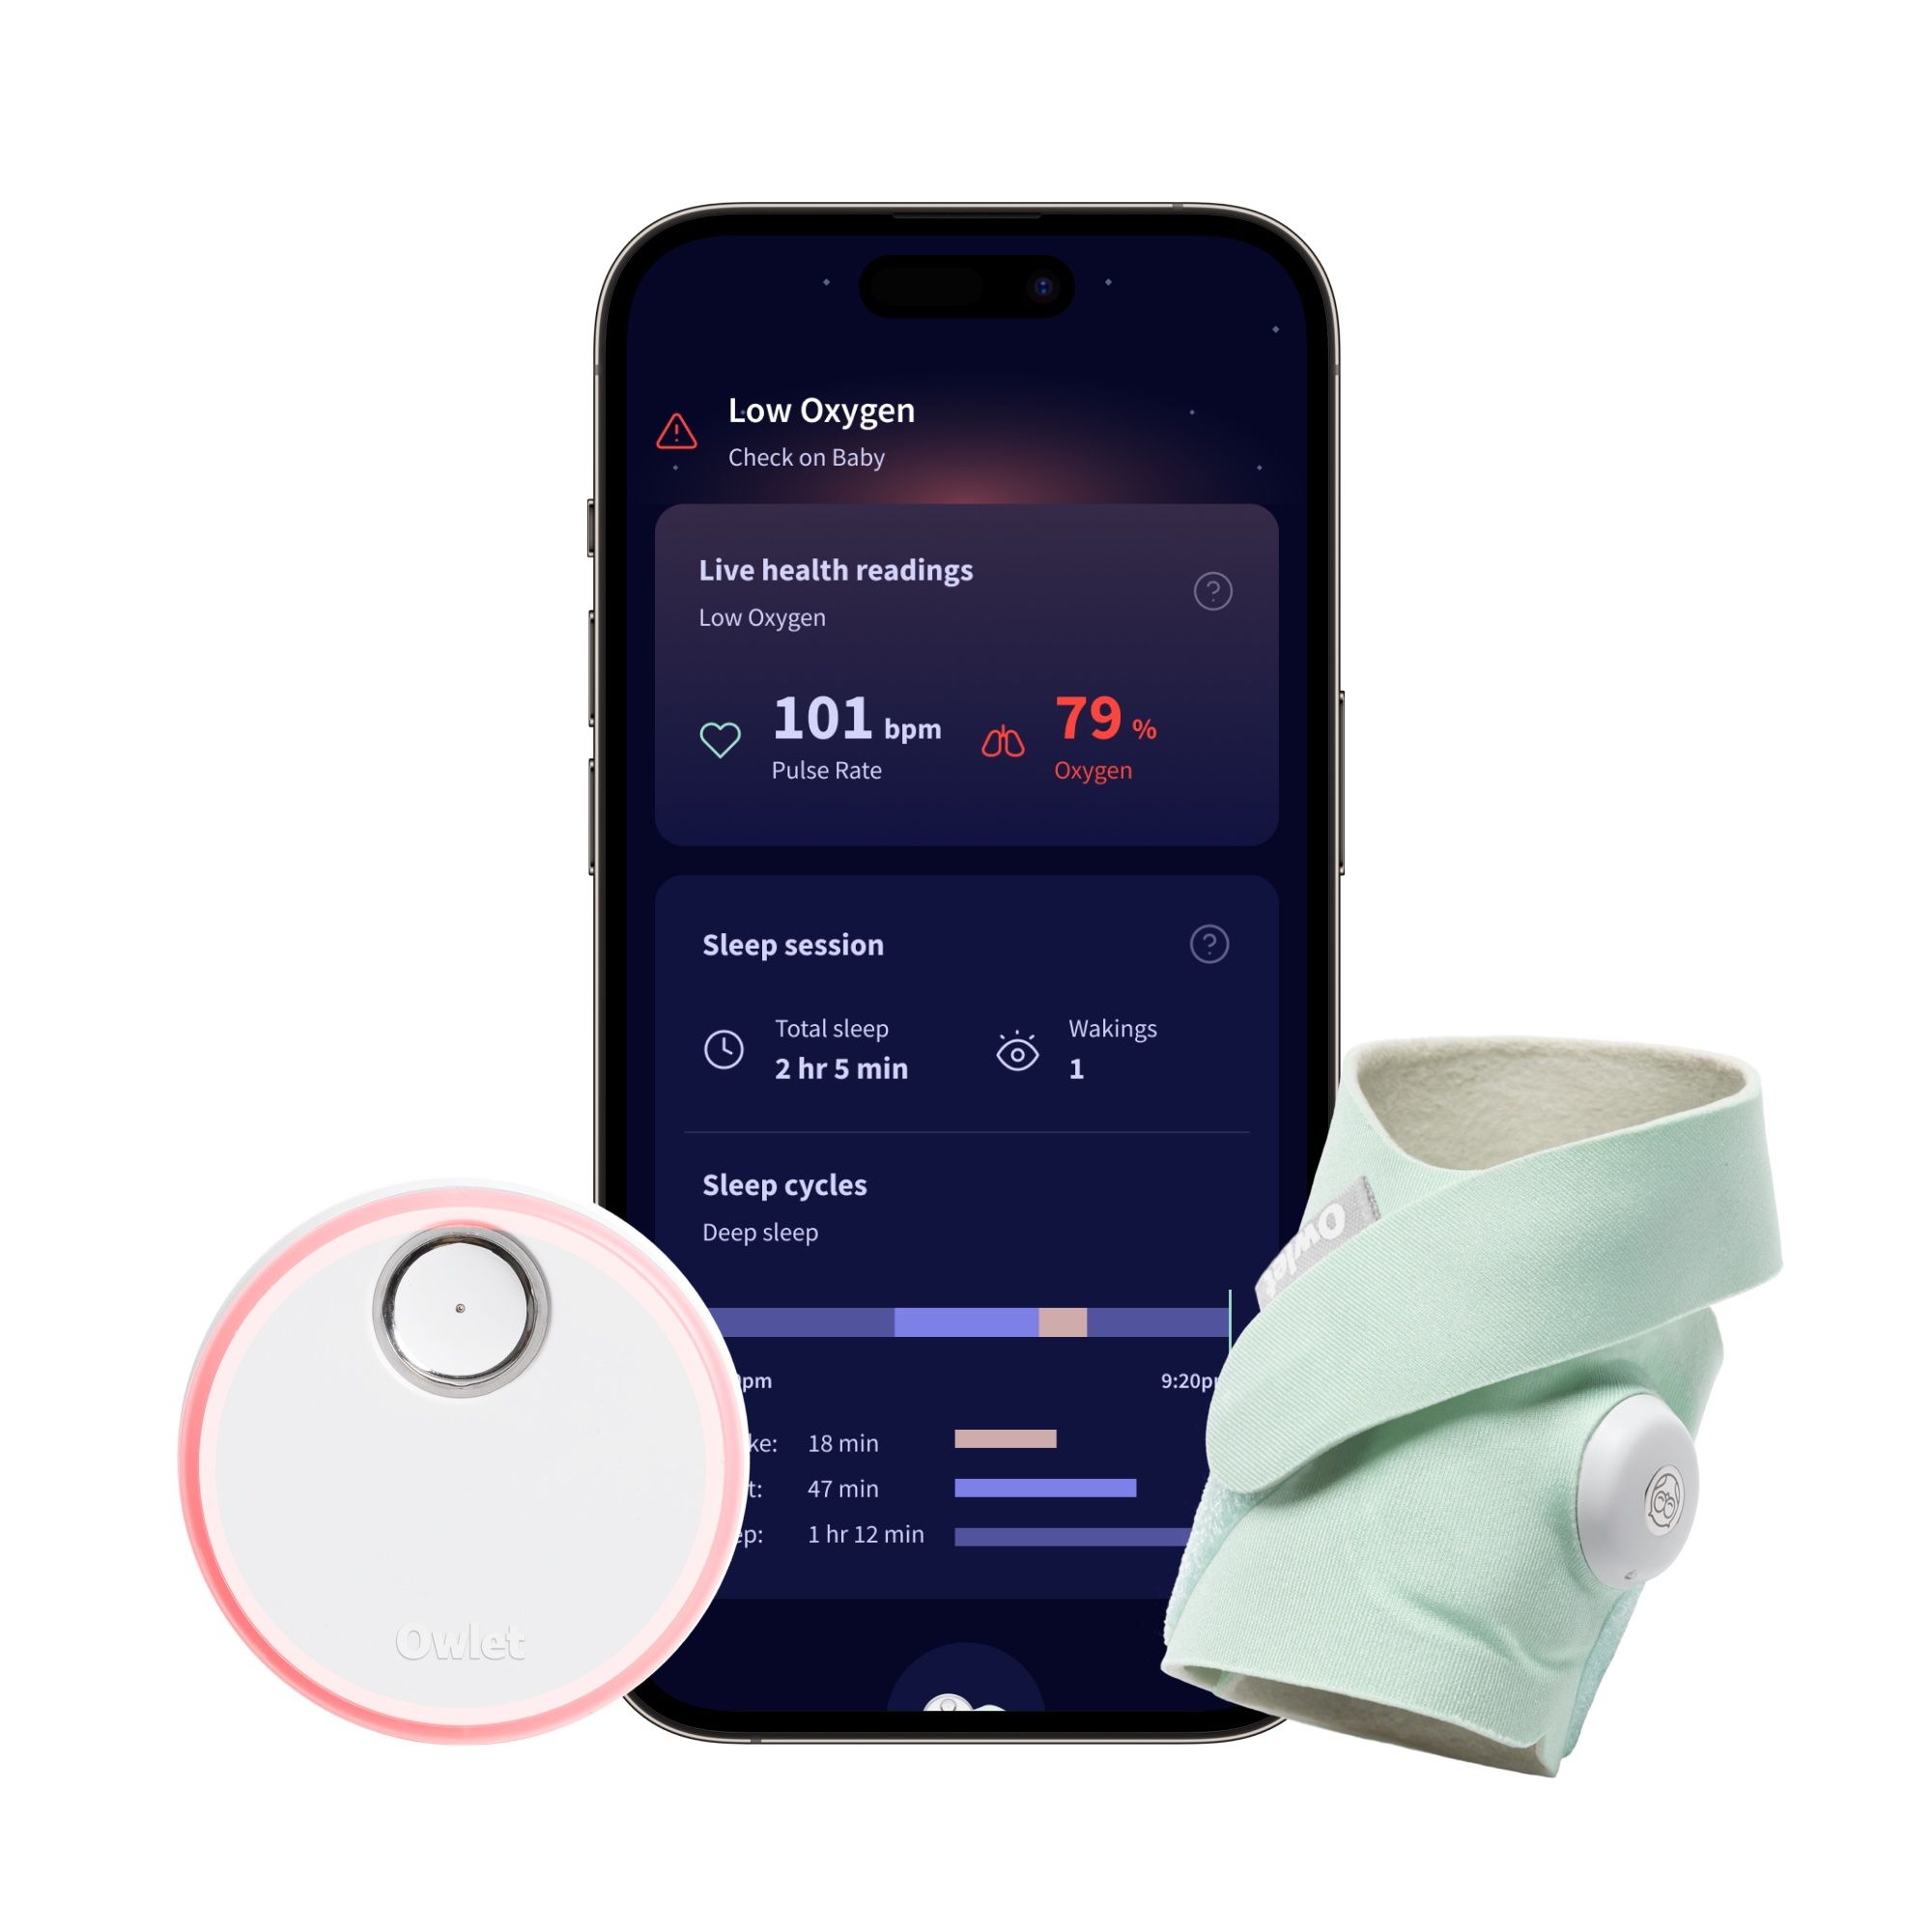 Owlet Dream Sock® - FDA-Cleared Smart Baby Monitor with Live Health Readings & Notifications - Mint Green